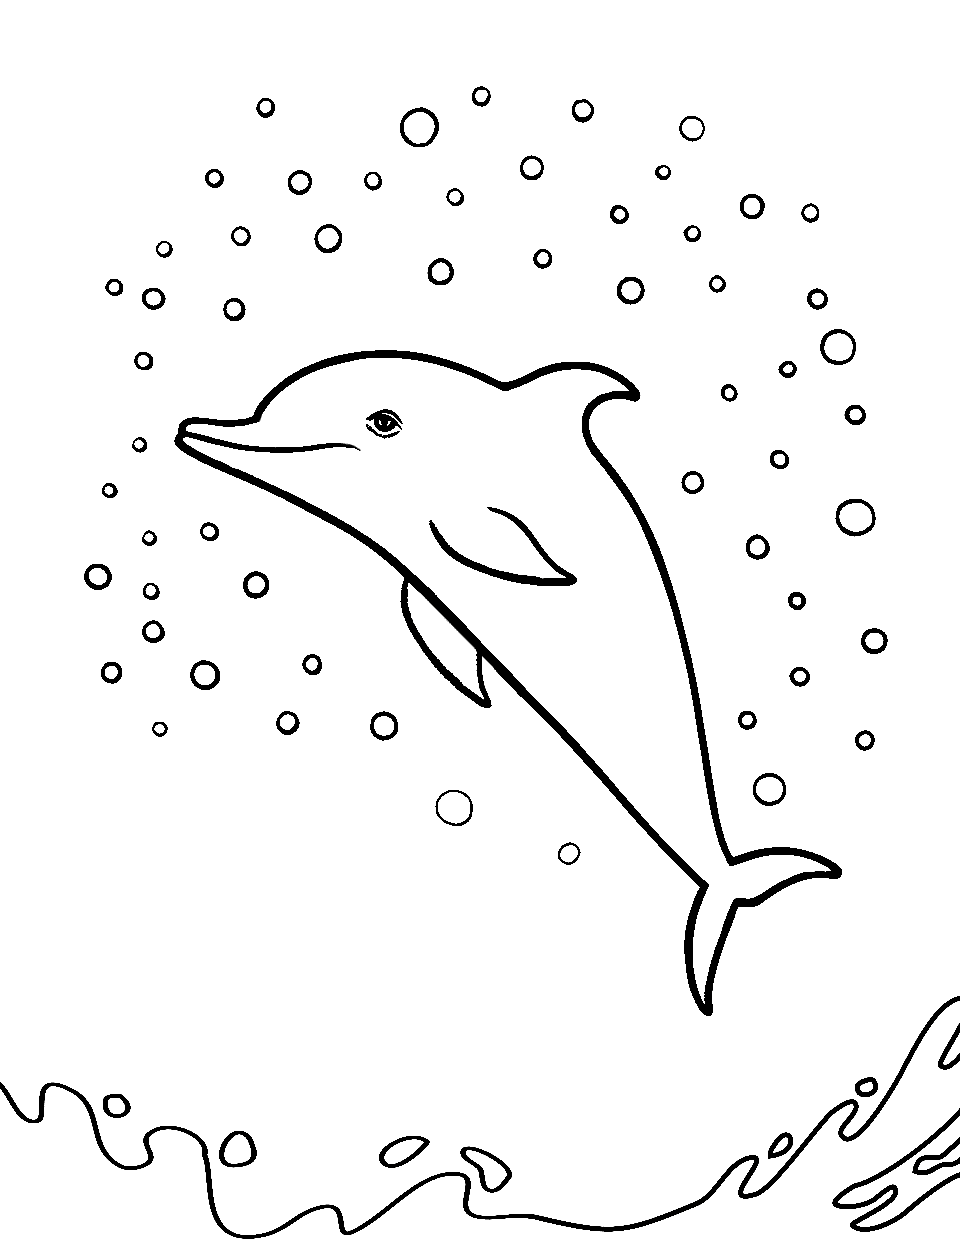 Enchanted Dolphin Dream Coloring Page - A dolphin gracefully leaping above a sea, subtly glowing with mystical lights.